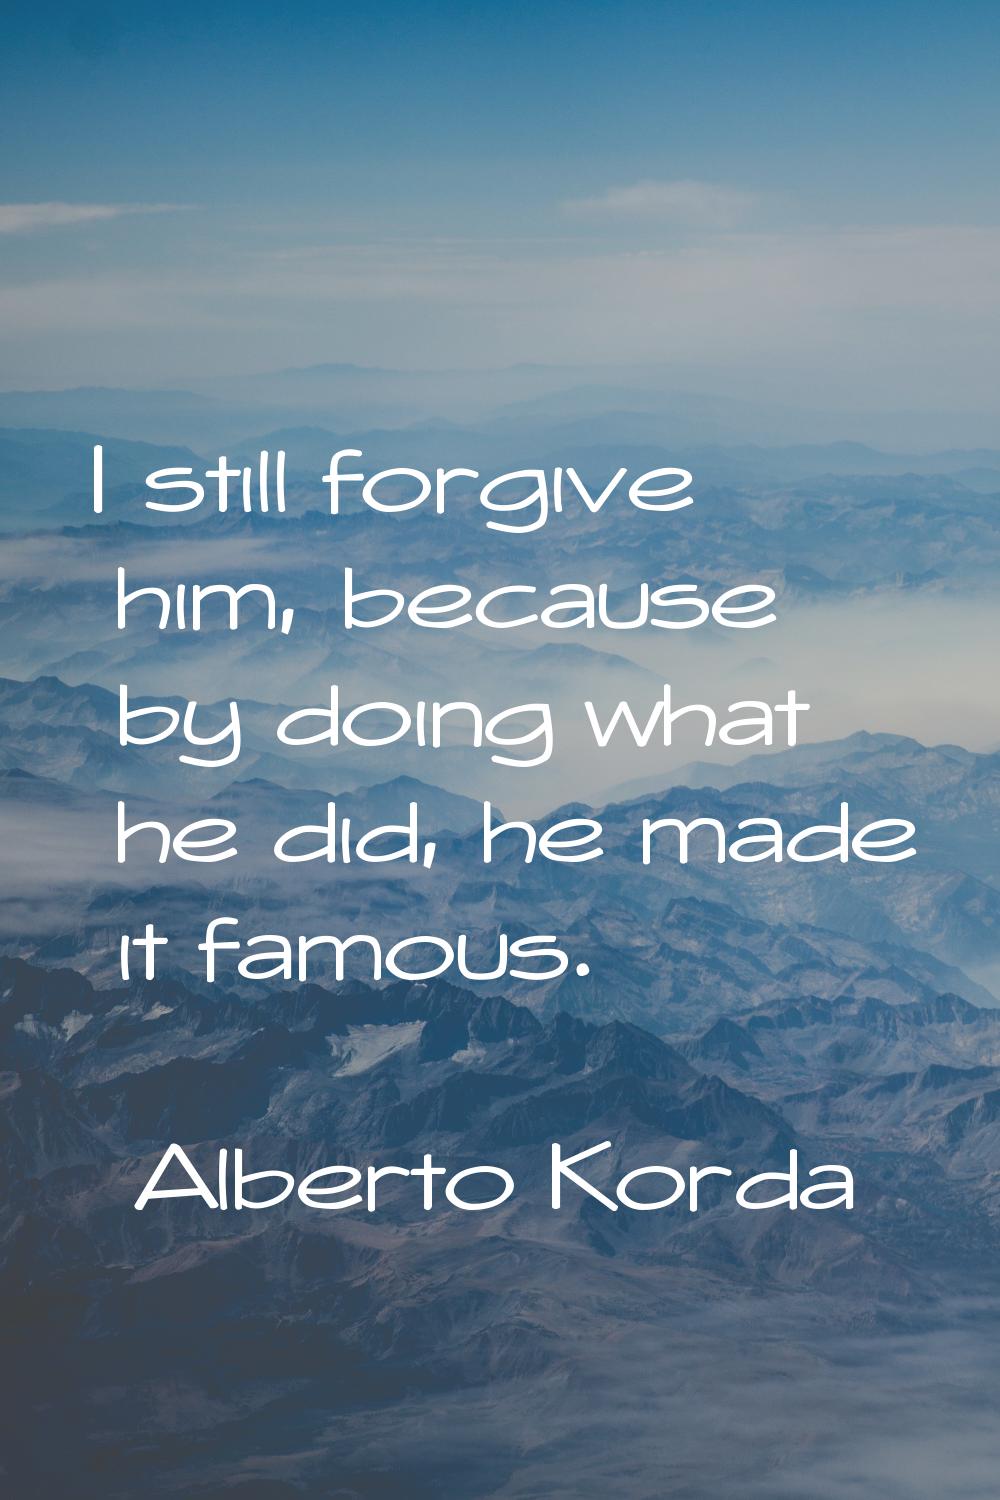 I still forgive him, because by doing what he did, he made it famous.